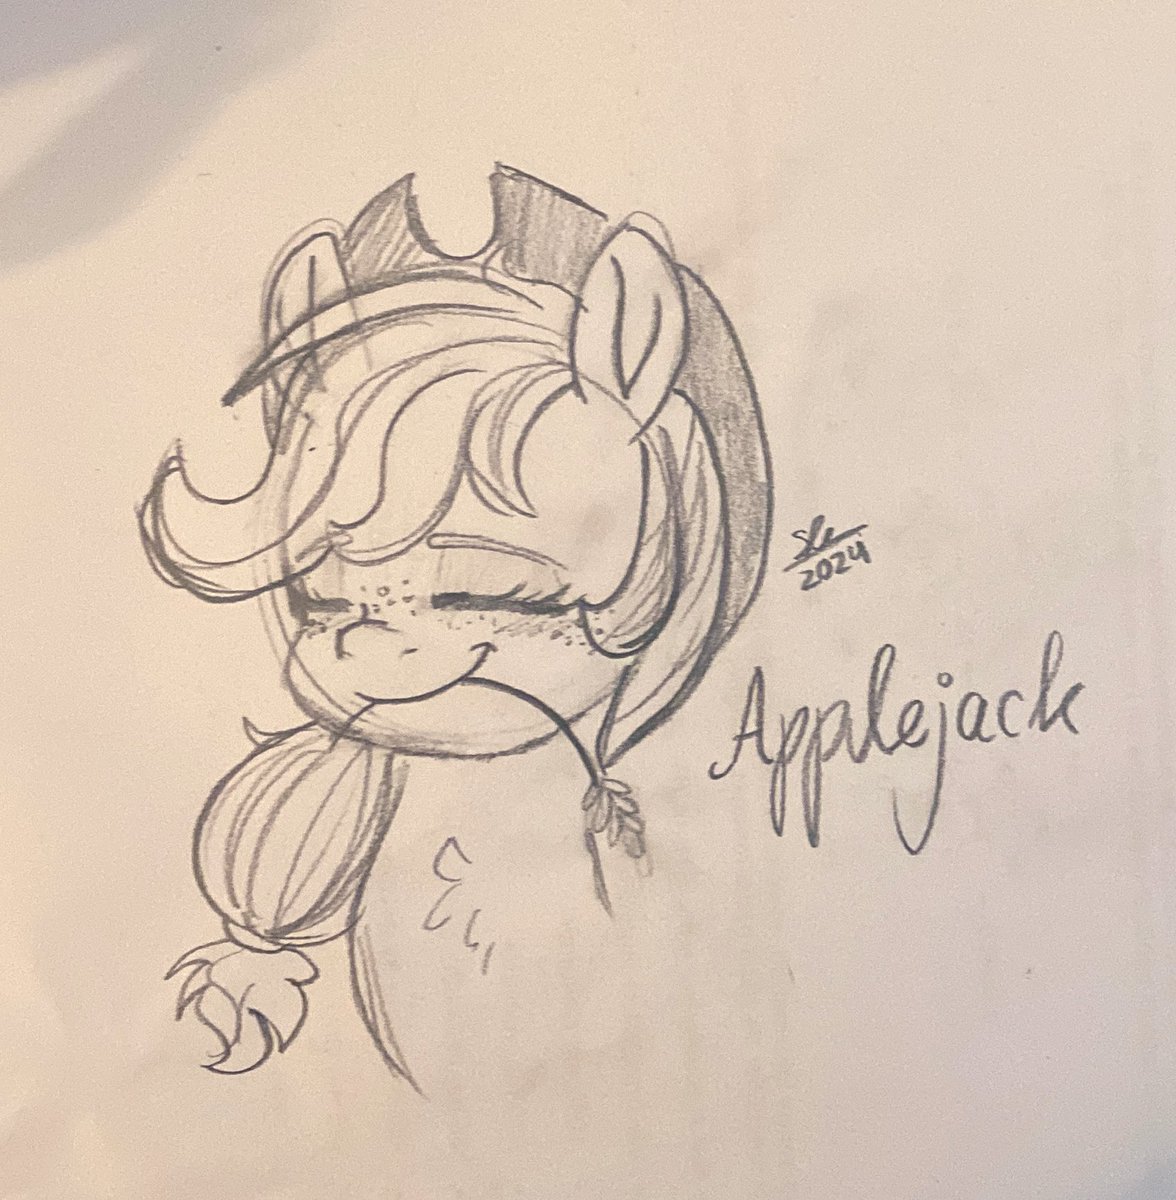 Day 25 of drawing applejack everyday until April is over 🍎 I’m studying so couldn’t draw a lot 😭